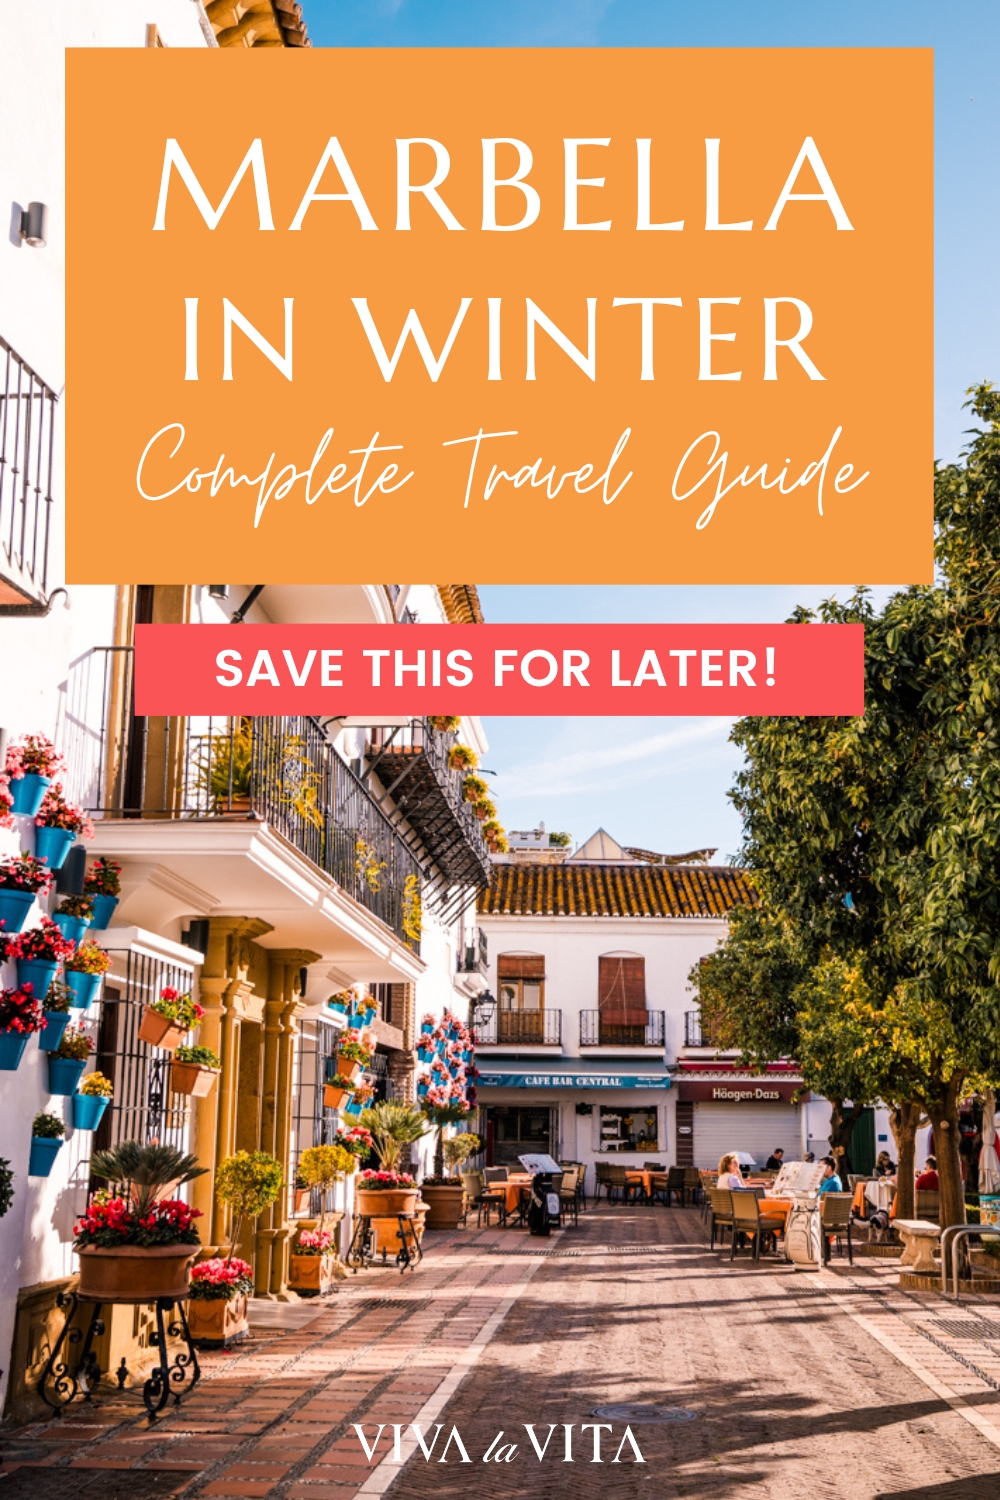 pinterest image showing plaza de los naranjos in Marbela on Costa del Sol, with a headline - Marbella in winter, complete travel guide